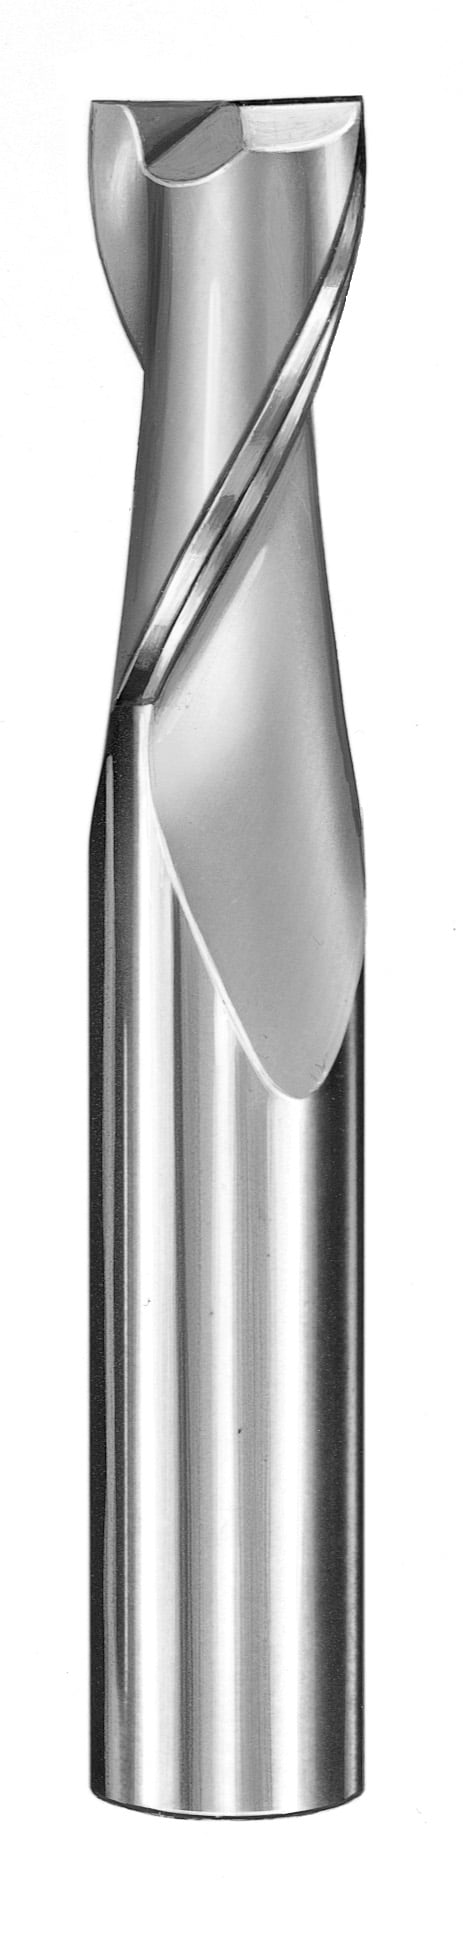 5/32" Dia, 2 Flute, Square End End Mill - 30319